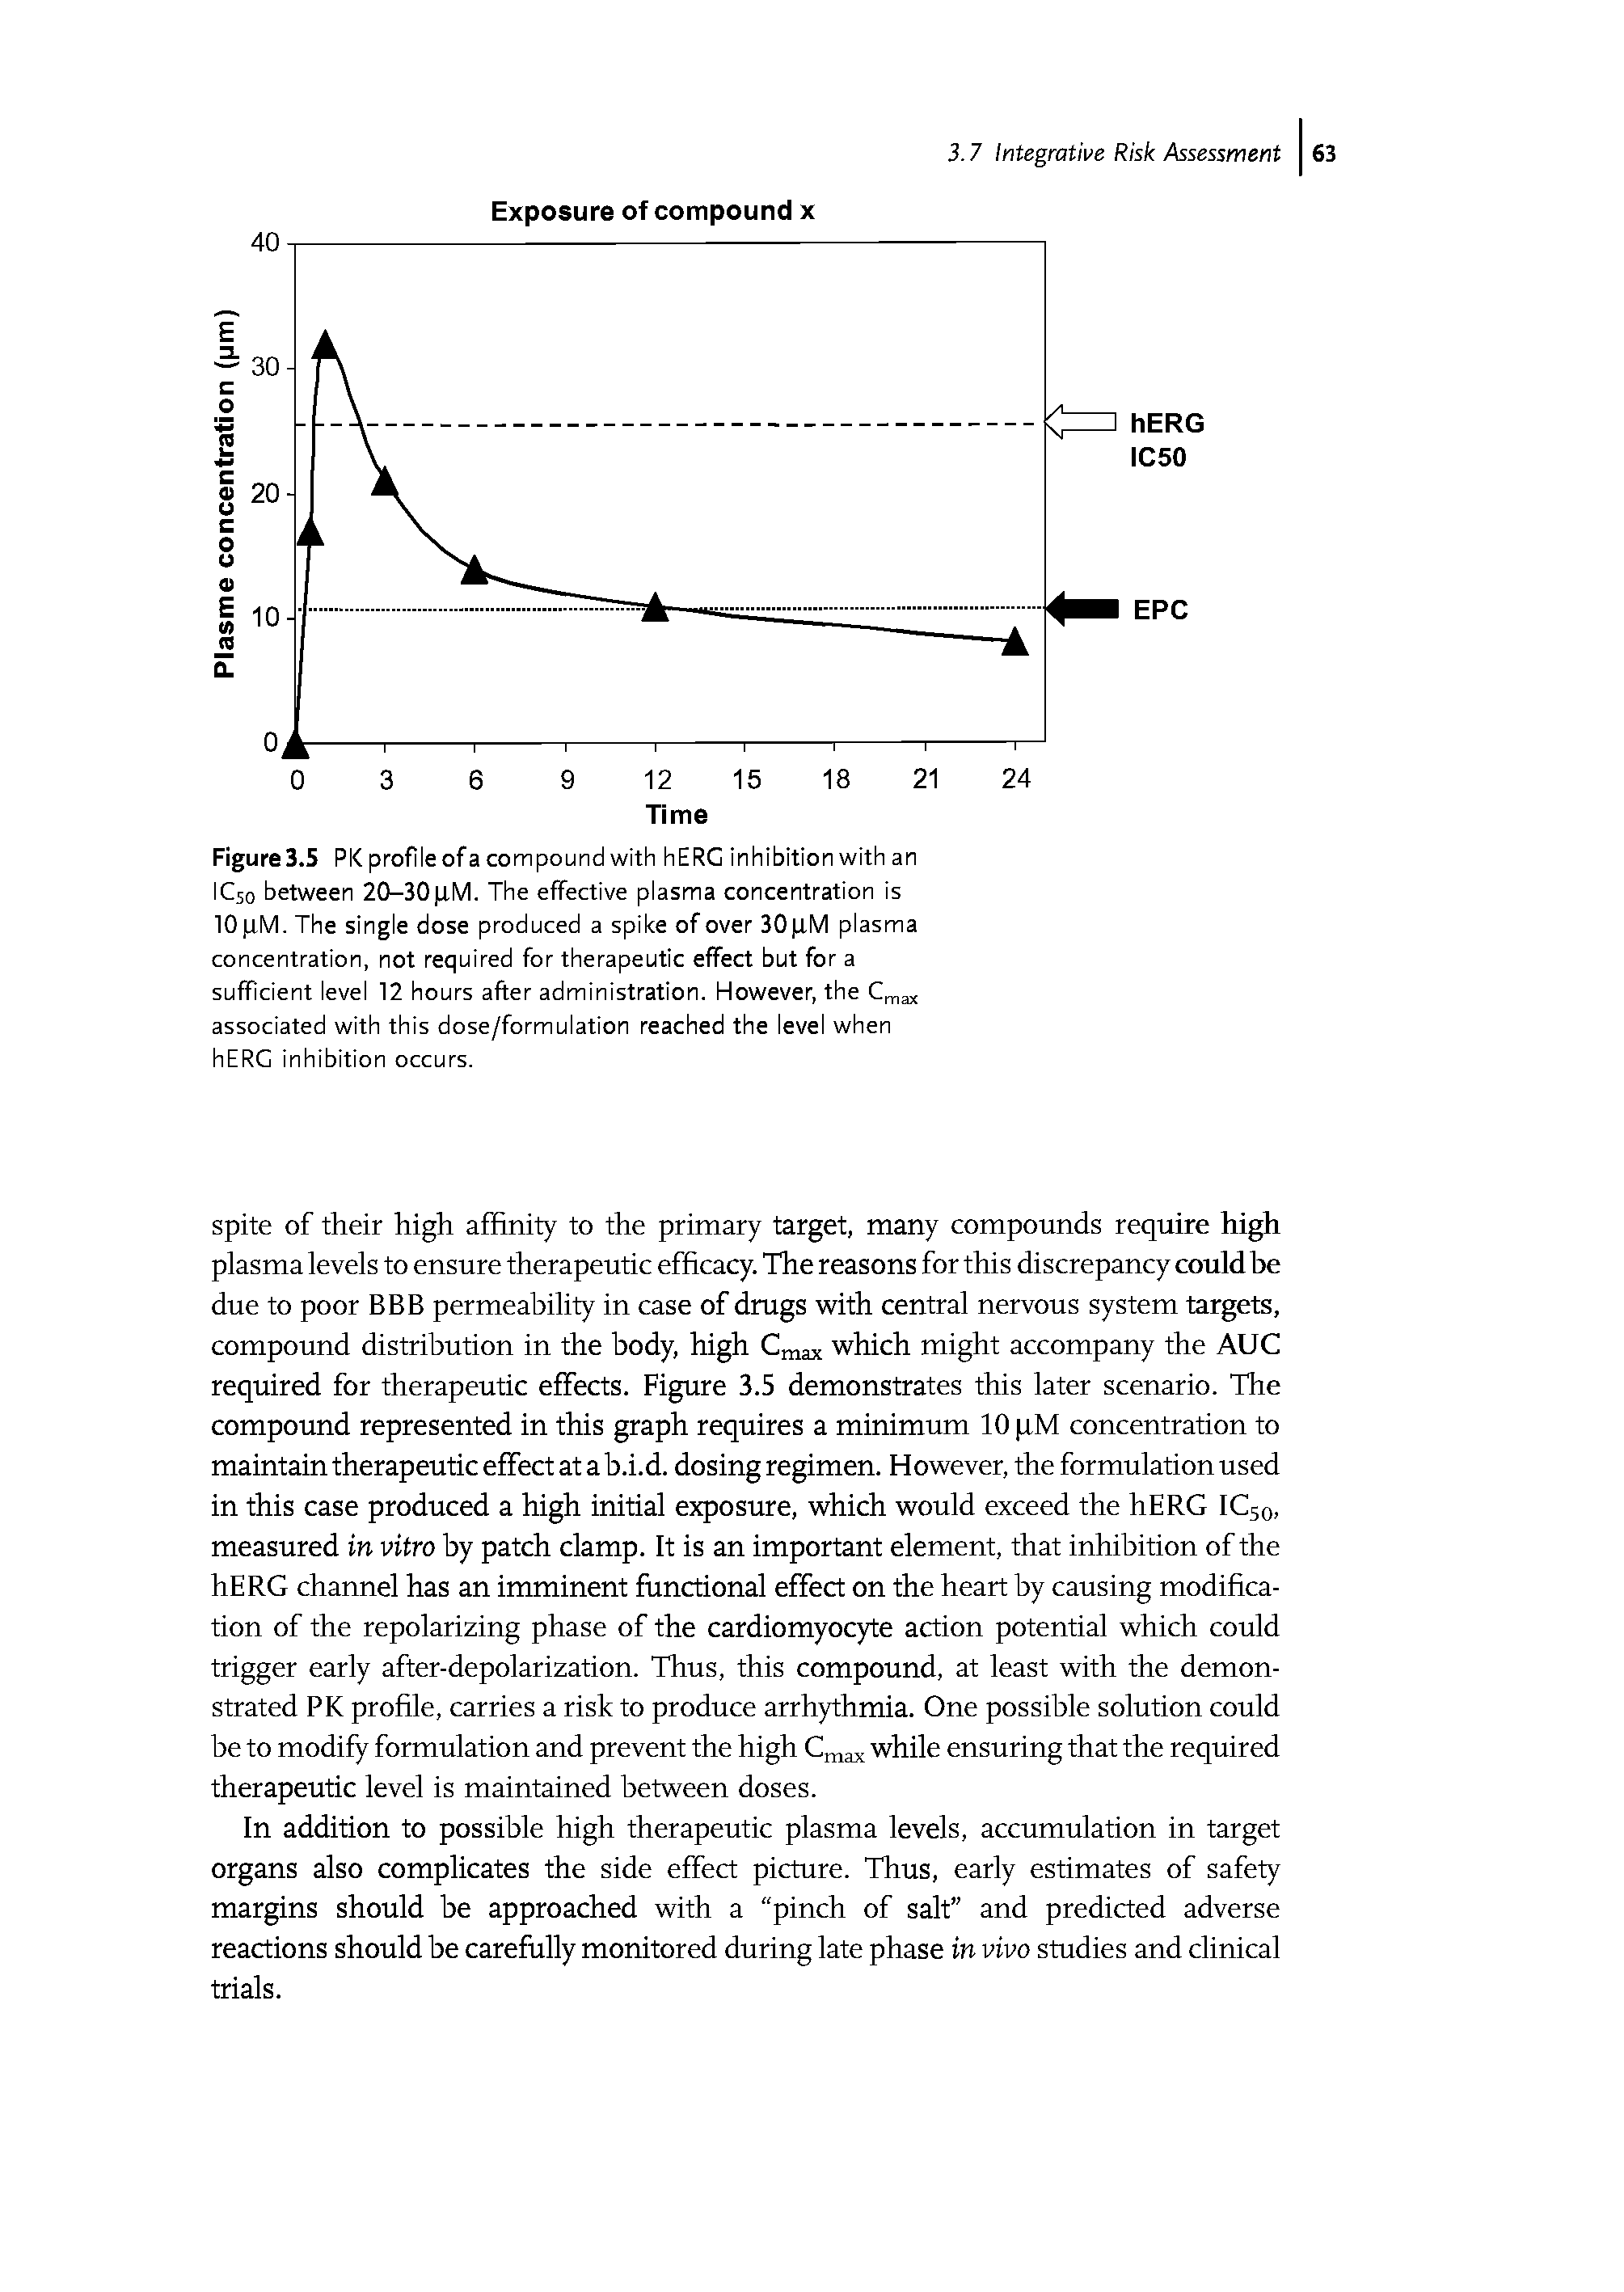 Figure 3.5 Pl< profile of a compound with hERC inhibition with an IC50 between 20-30 XM. The effective plasma concentration is 10 xM. The single dose produced a spike of over 30 xM plasma concentration, not required for therapeutic effect but for a sufficient level 12 hours after administration. However, the associated with this dose/formulation reached the level when hERG inhibition occurs.